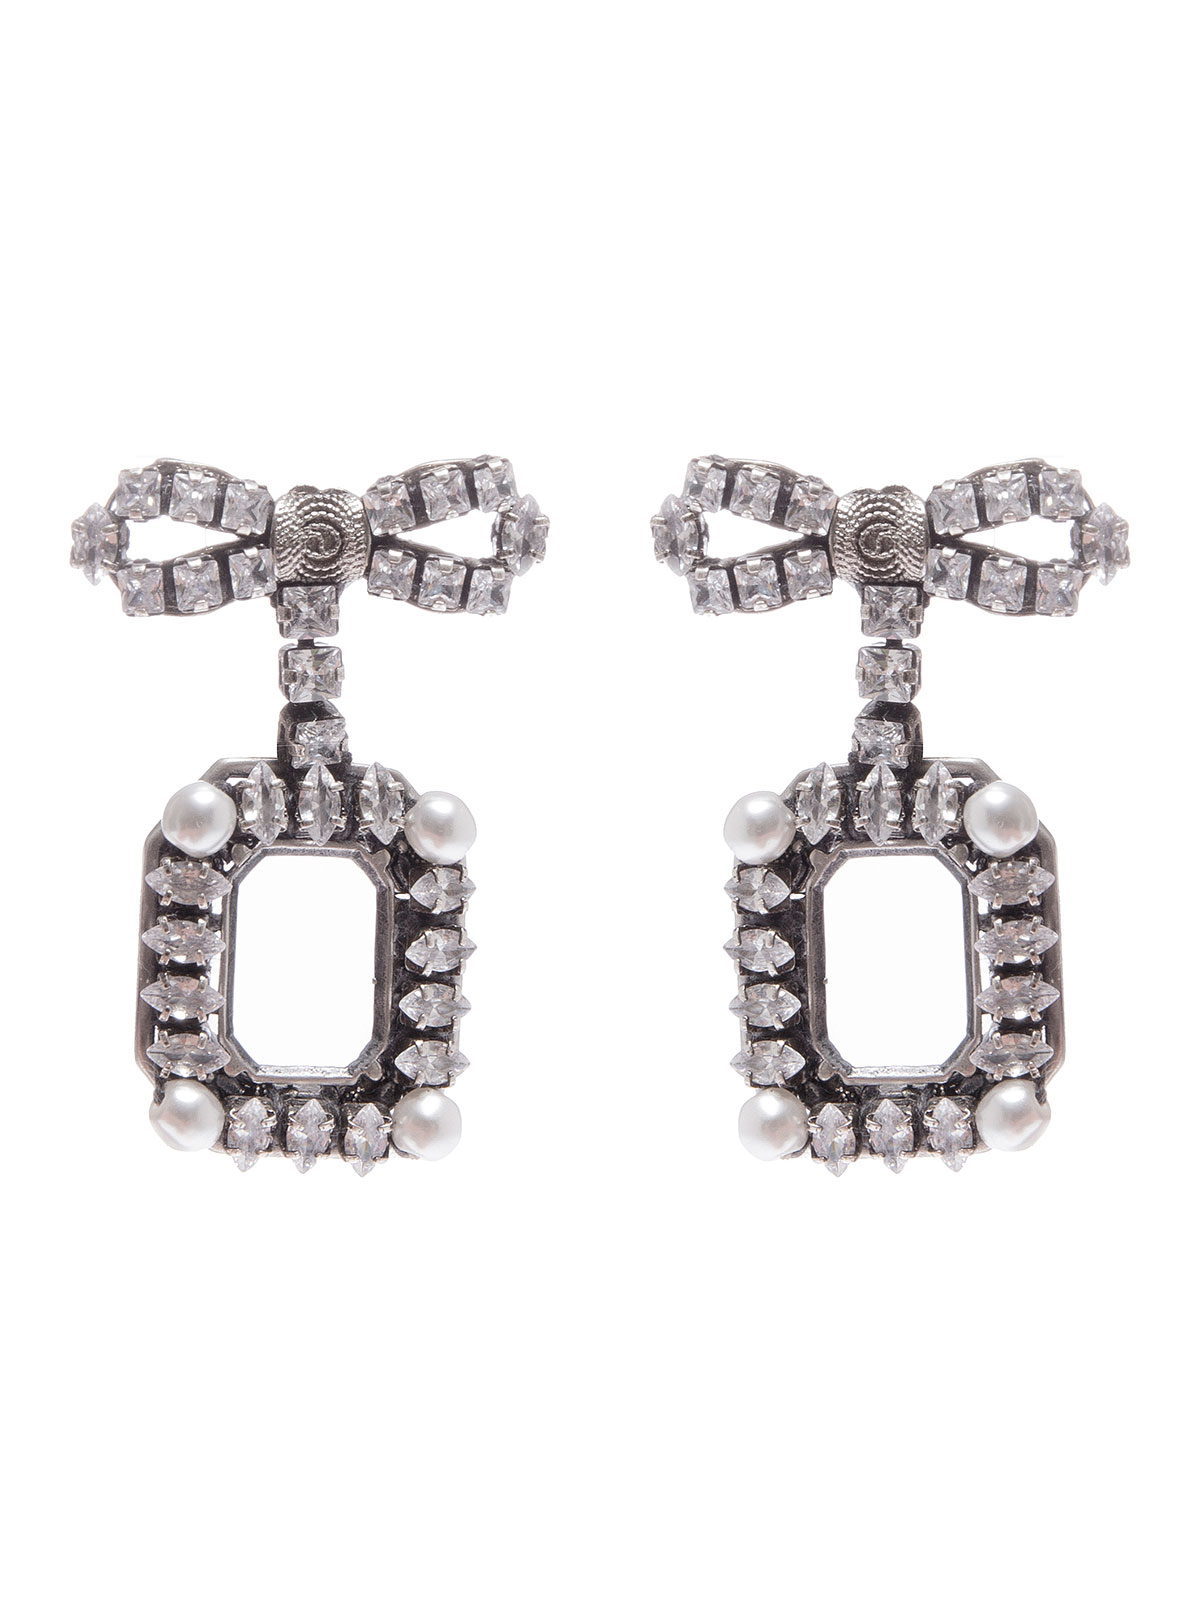 Crystal bow earrings with pendent octagons embellished with crystals and pearls